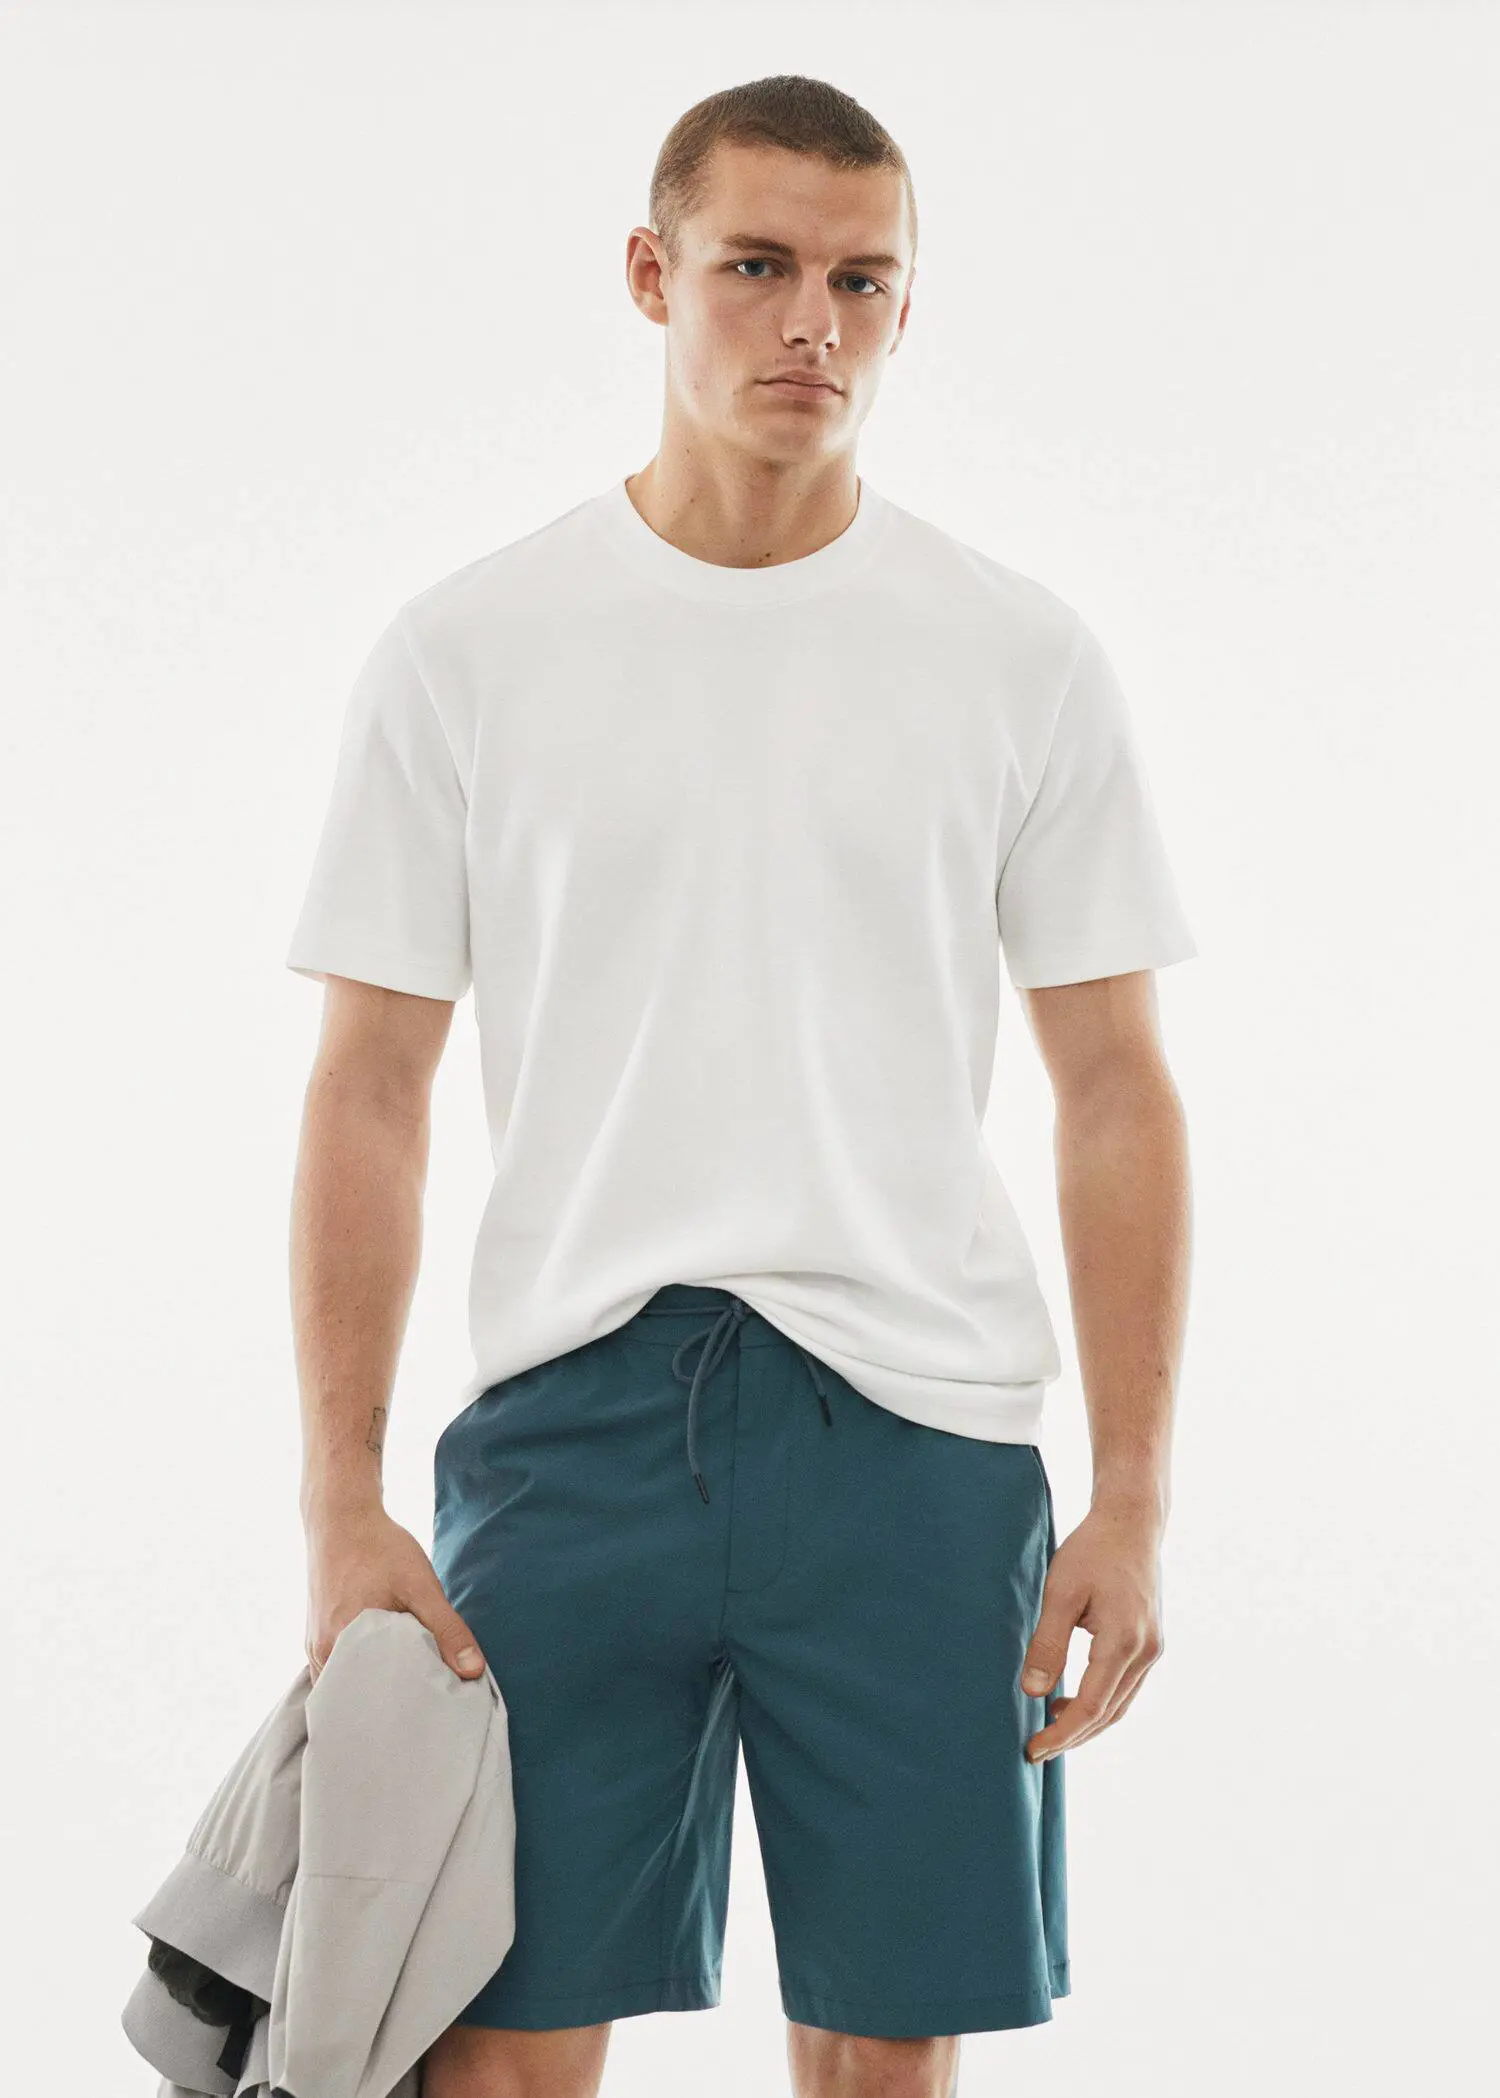 Mango Breathable cotton t-shirt. a man in white shirt and blue shorts holding a tennis racket. 